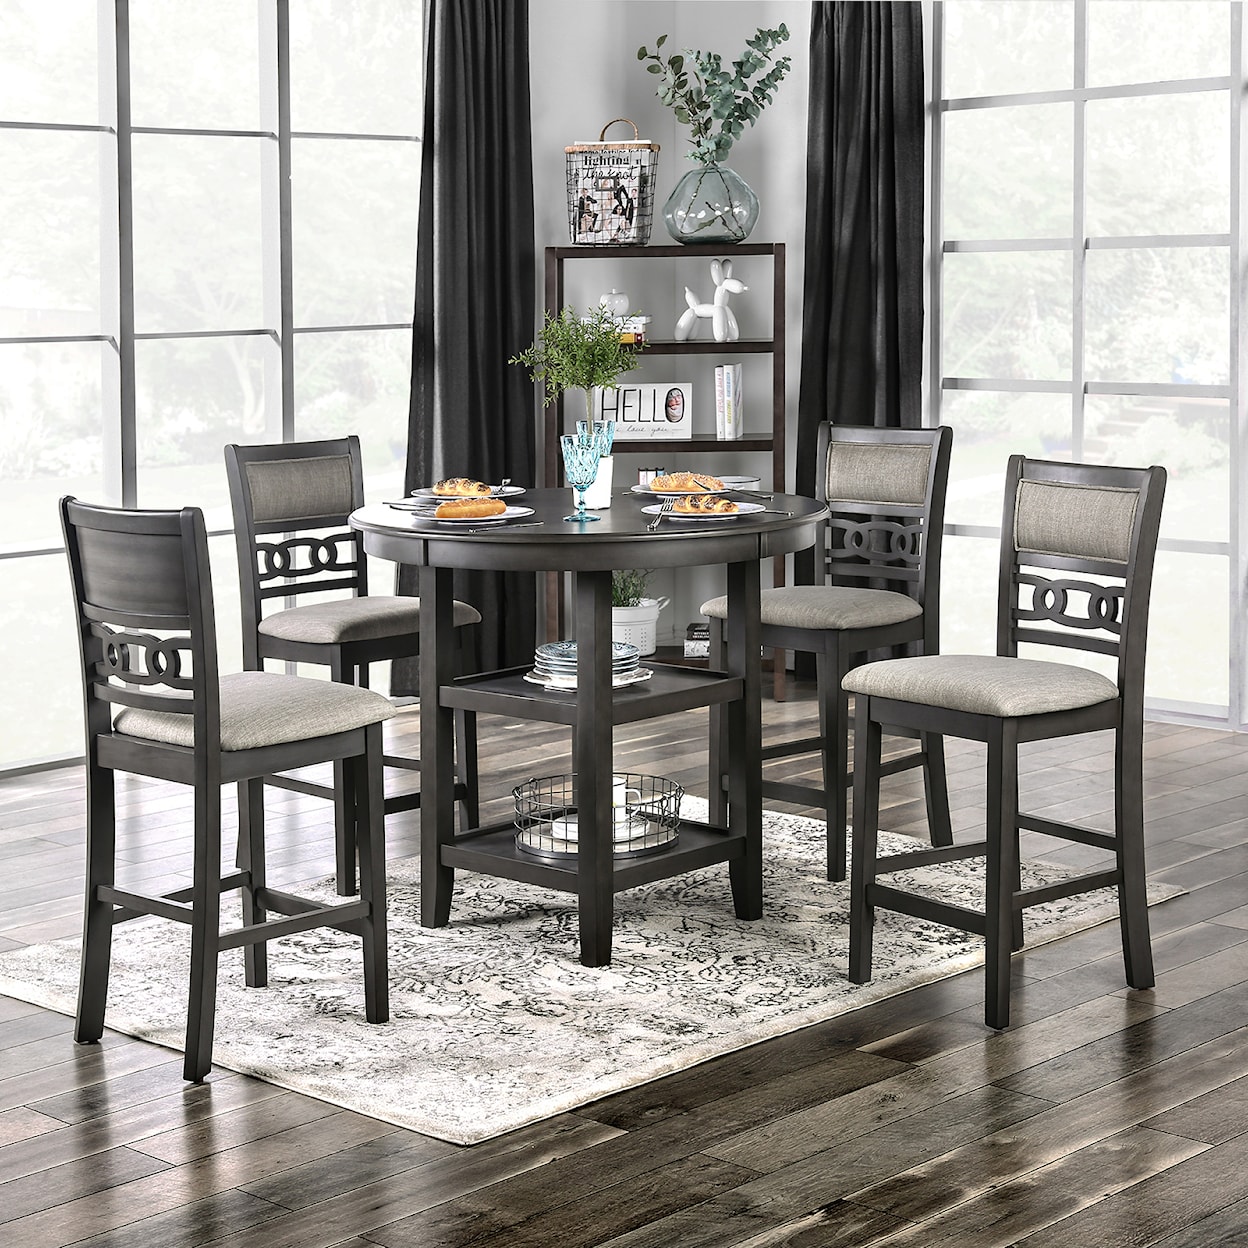 Furniture of America Milly Counter Height Dining Set